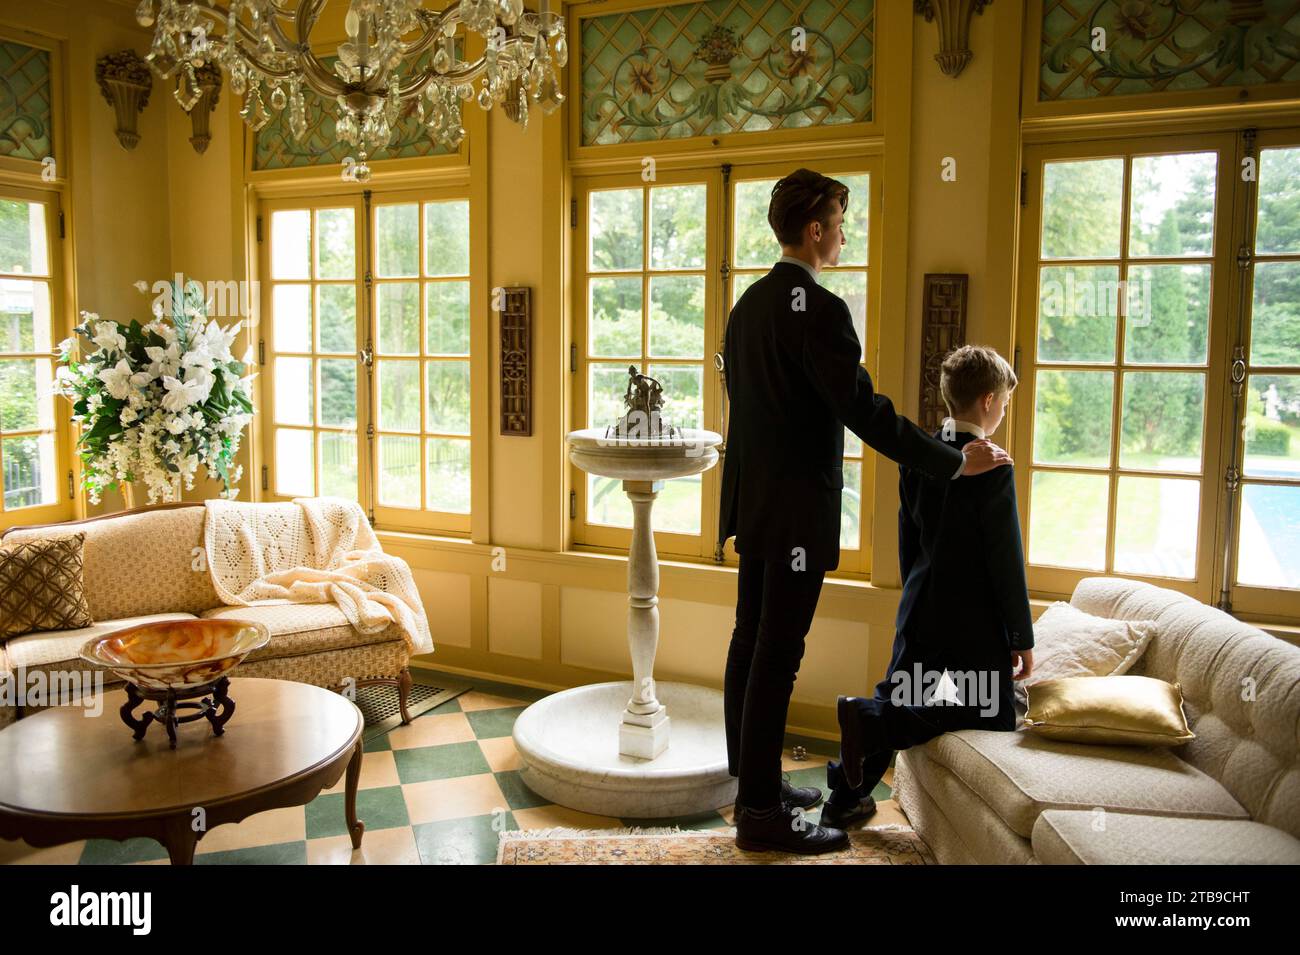 Young man and young boy in formalwear look out the window together; Lincoln, Nebraska, United States of America Stock Photo